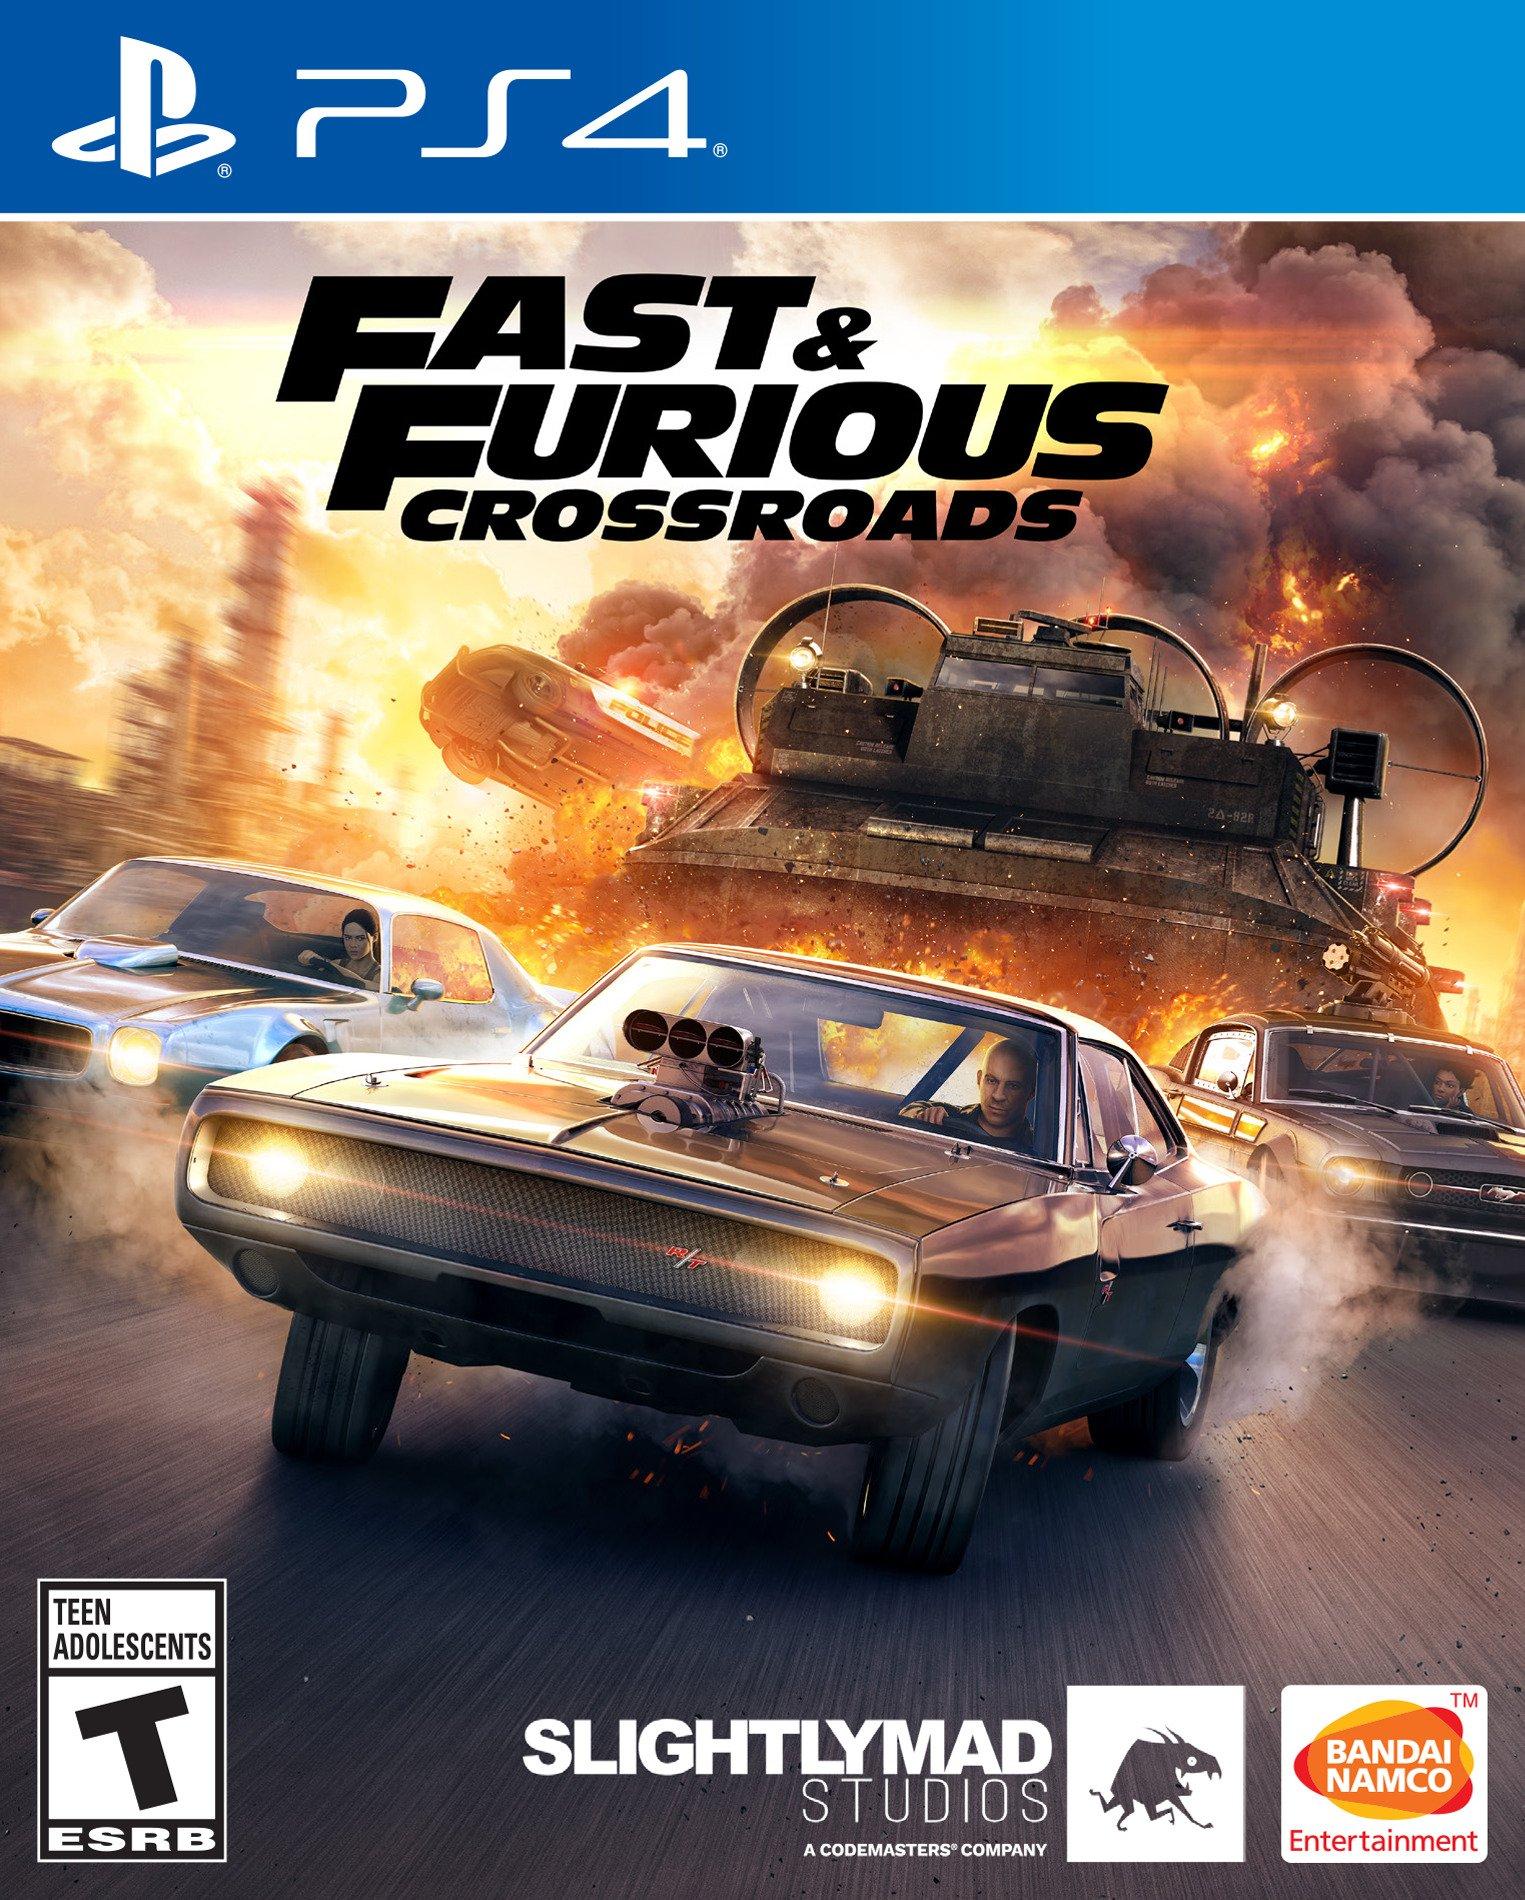 FAST GAMES